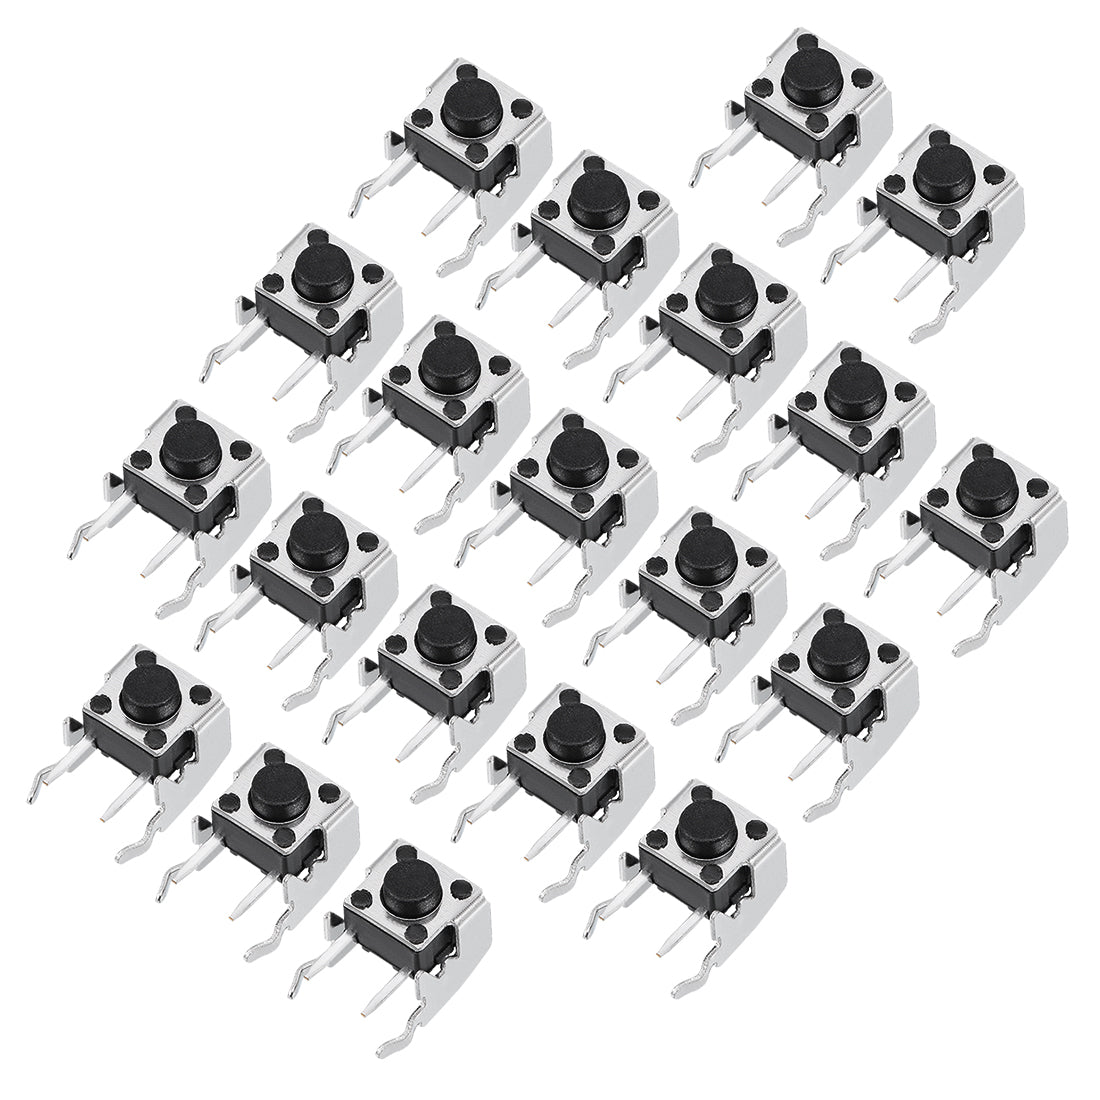 uxcell Uxcell 20Pcs Momentary PCB Side Mounting Fixed Bracket Pushbutton Push Button Tact Tactile Switch DIP 2 Terminals 6x6x5mm